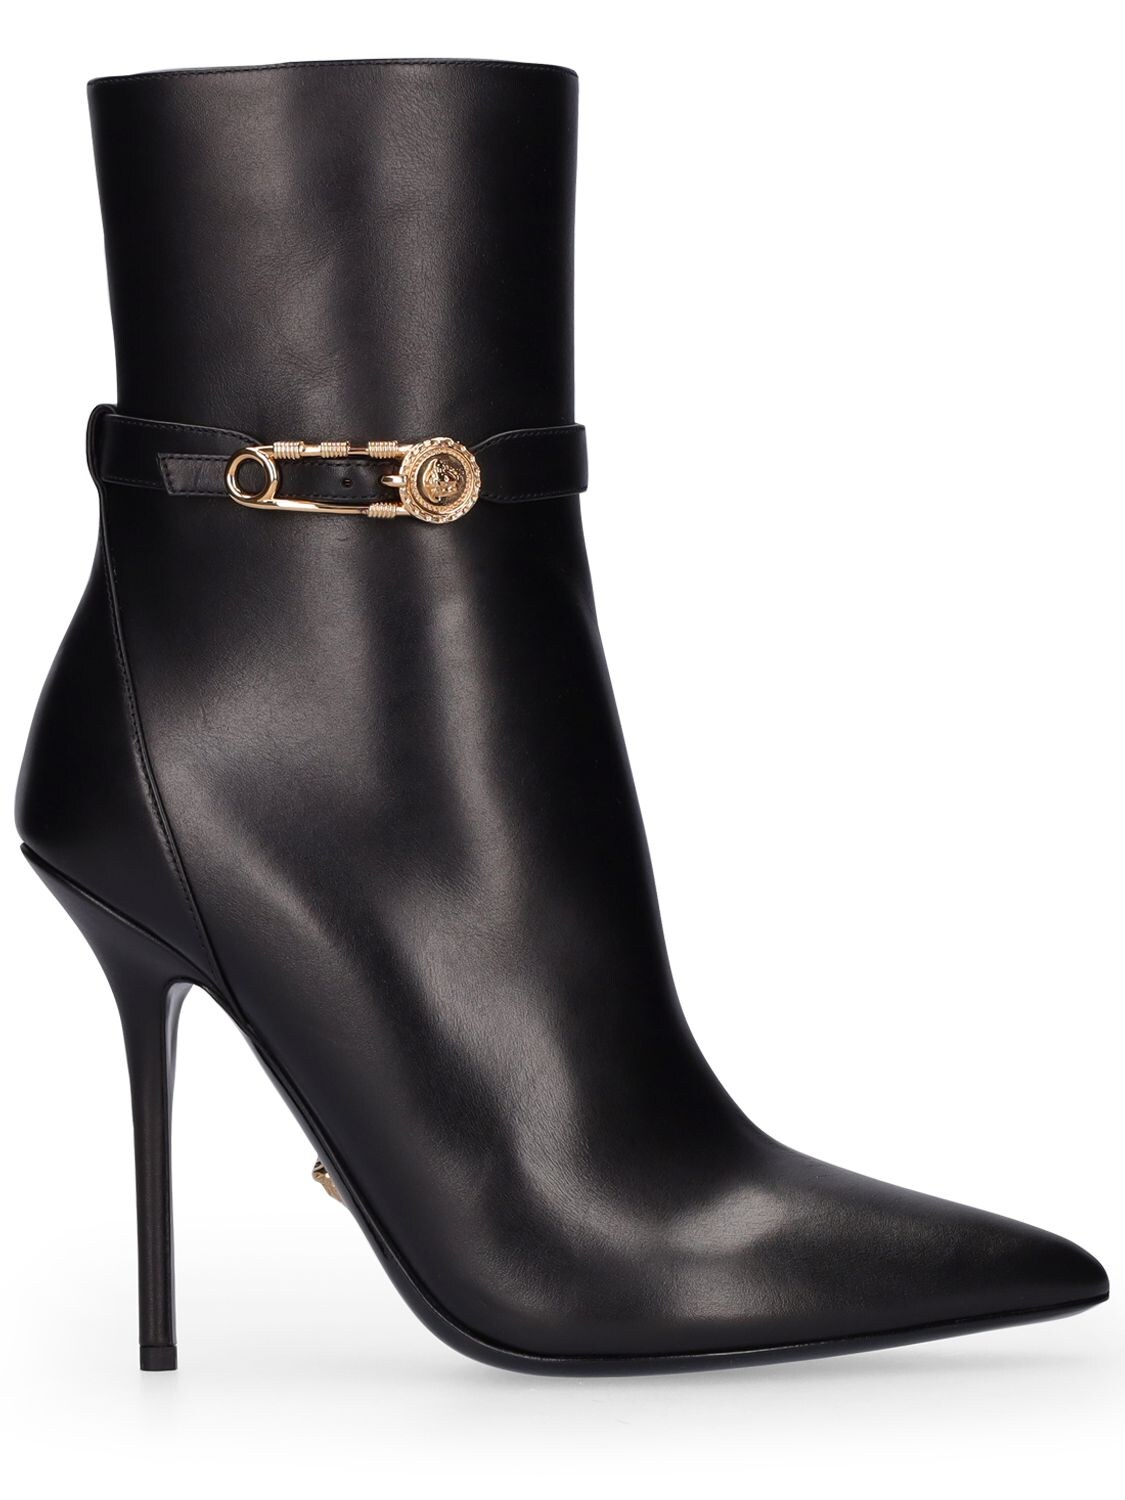 110mm Leather Ankle Boots